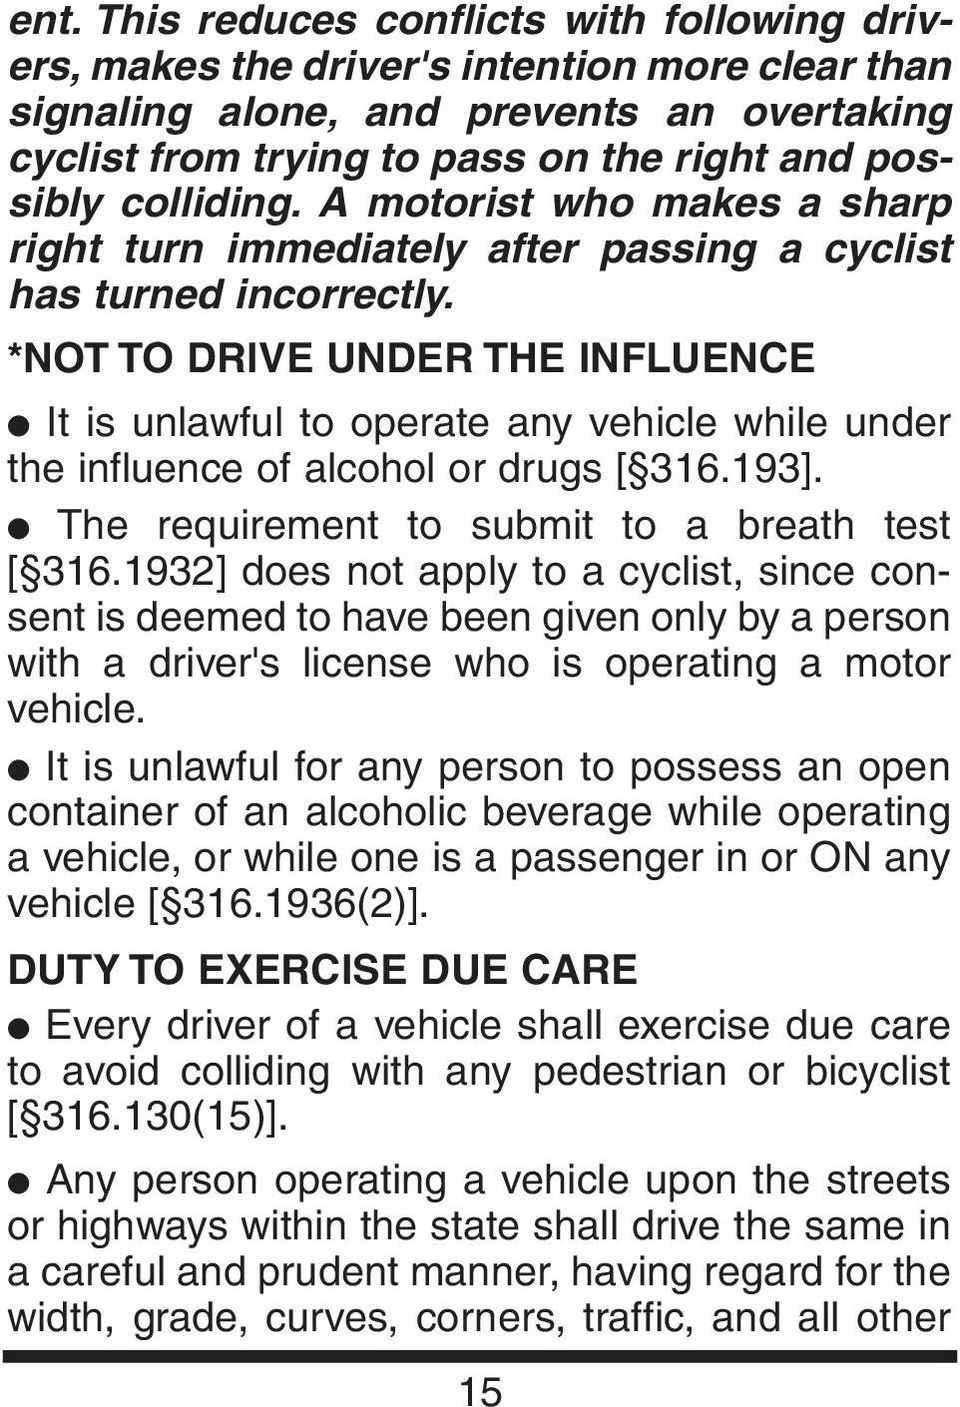 *NOT TO DRIVE UNDER THE INFLUENCE It is unlawful to operate any vehicle while under the influence of alcohol or drugs [ 316.193]. The requirement to submit to a breath test [ 316.